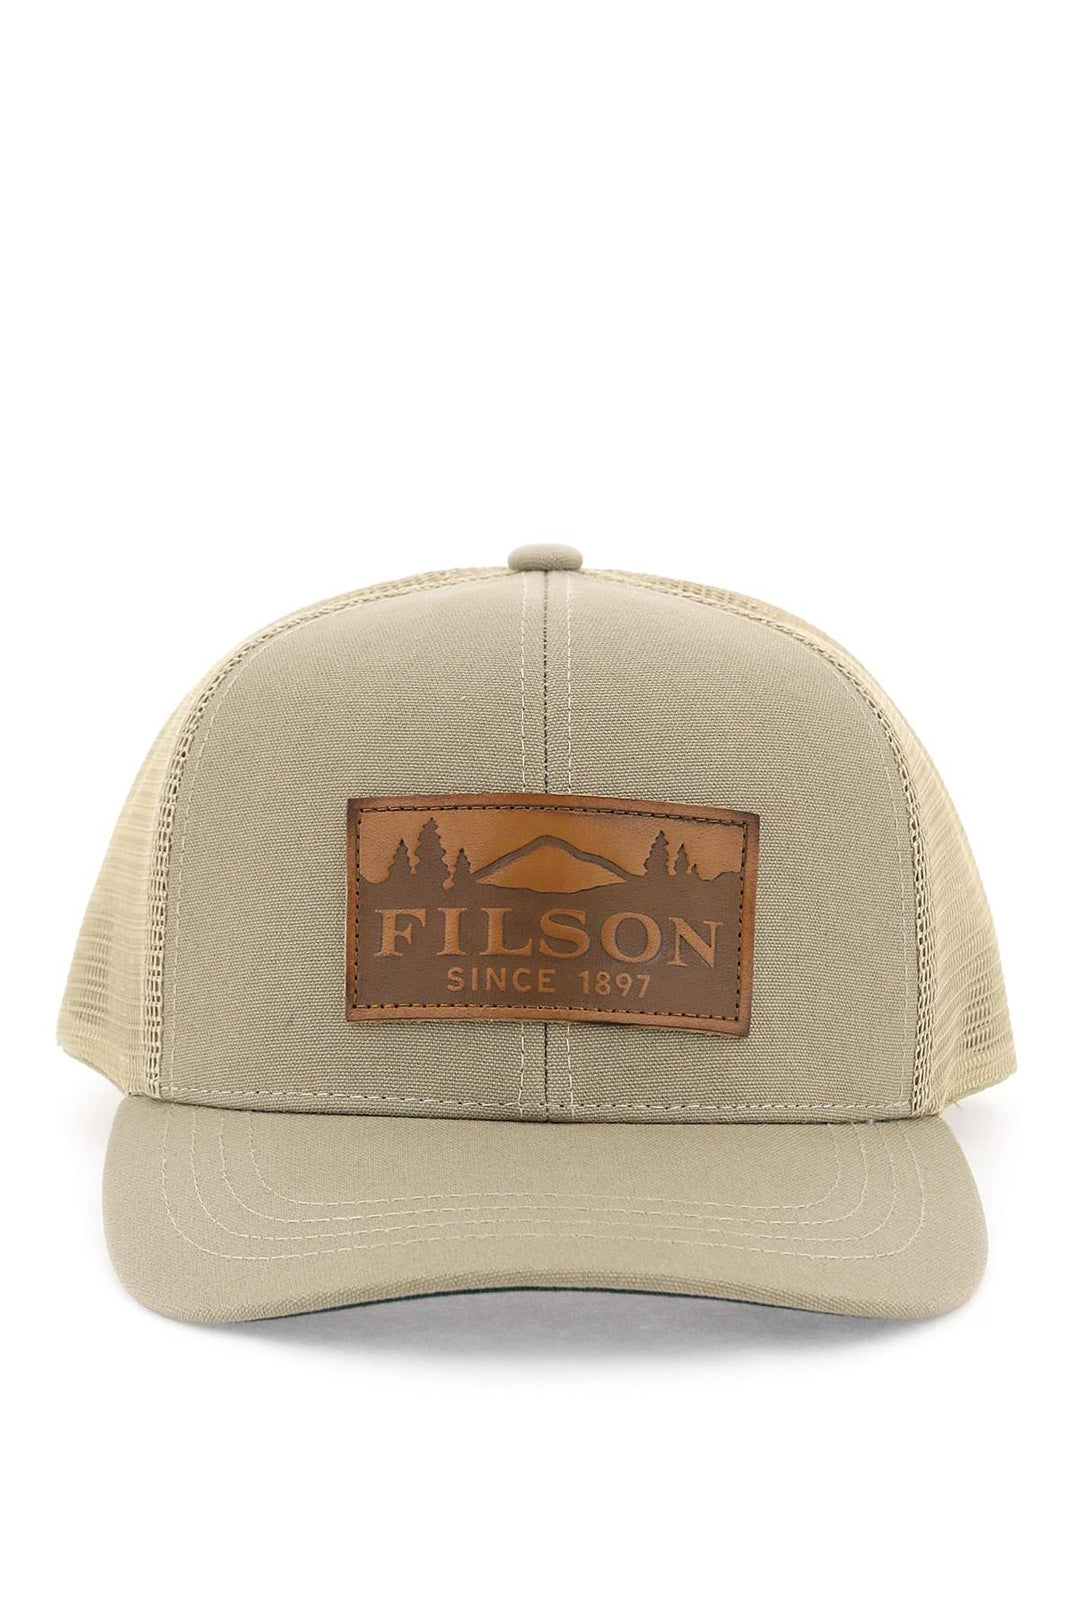 Filson Replace With Double Quotemesh Logger Baseball Cap With Breath   Khaki